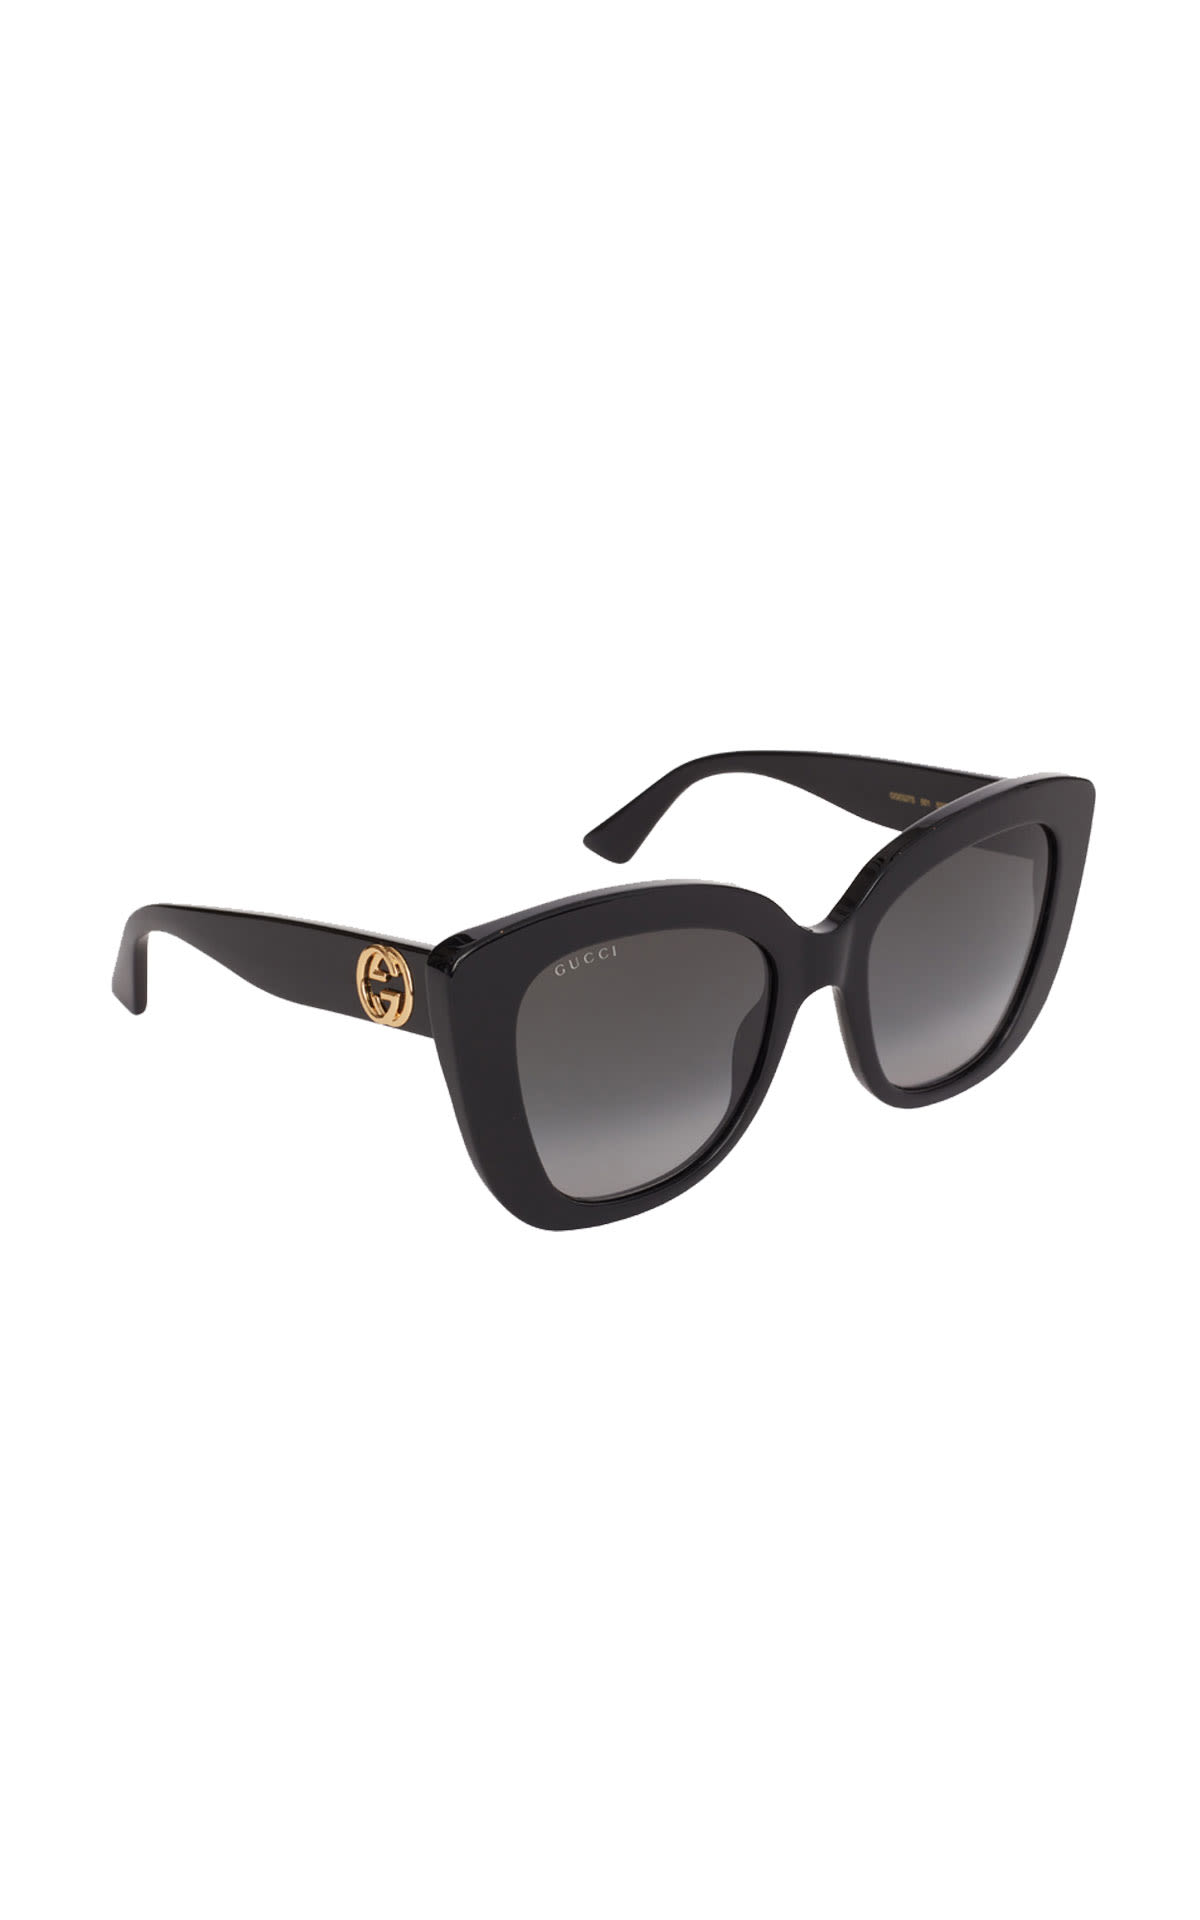 David Clulow Sunglasses Gucci sunglasses from Bicester Village